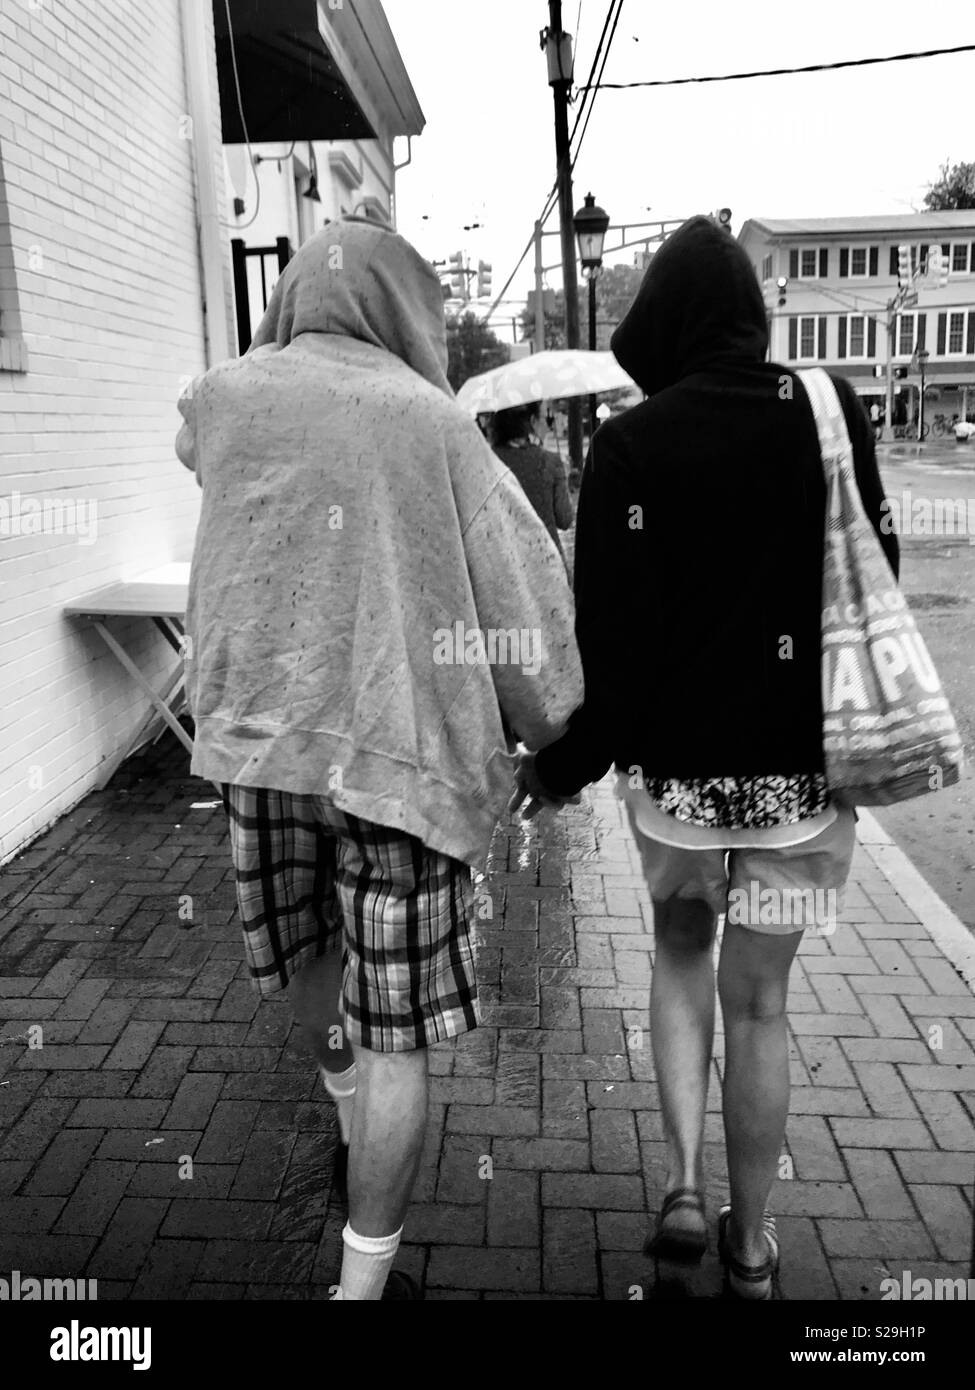 View of the backs of an older couple wearing hoods walking hand in hand in the rain. They are wearing shorts and sweatshirts. Black and white photograph. Walking stay from the camera. Stock Photo